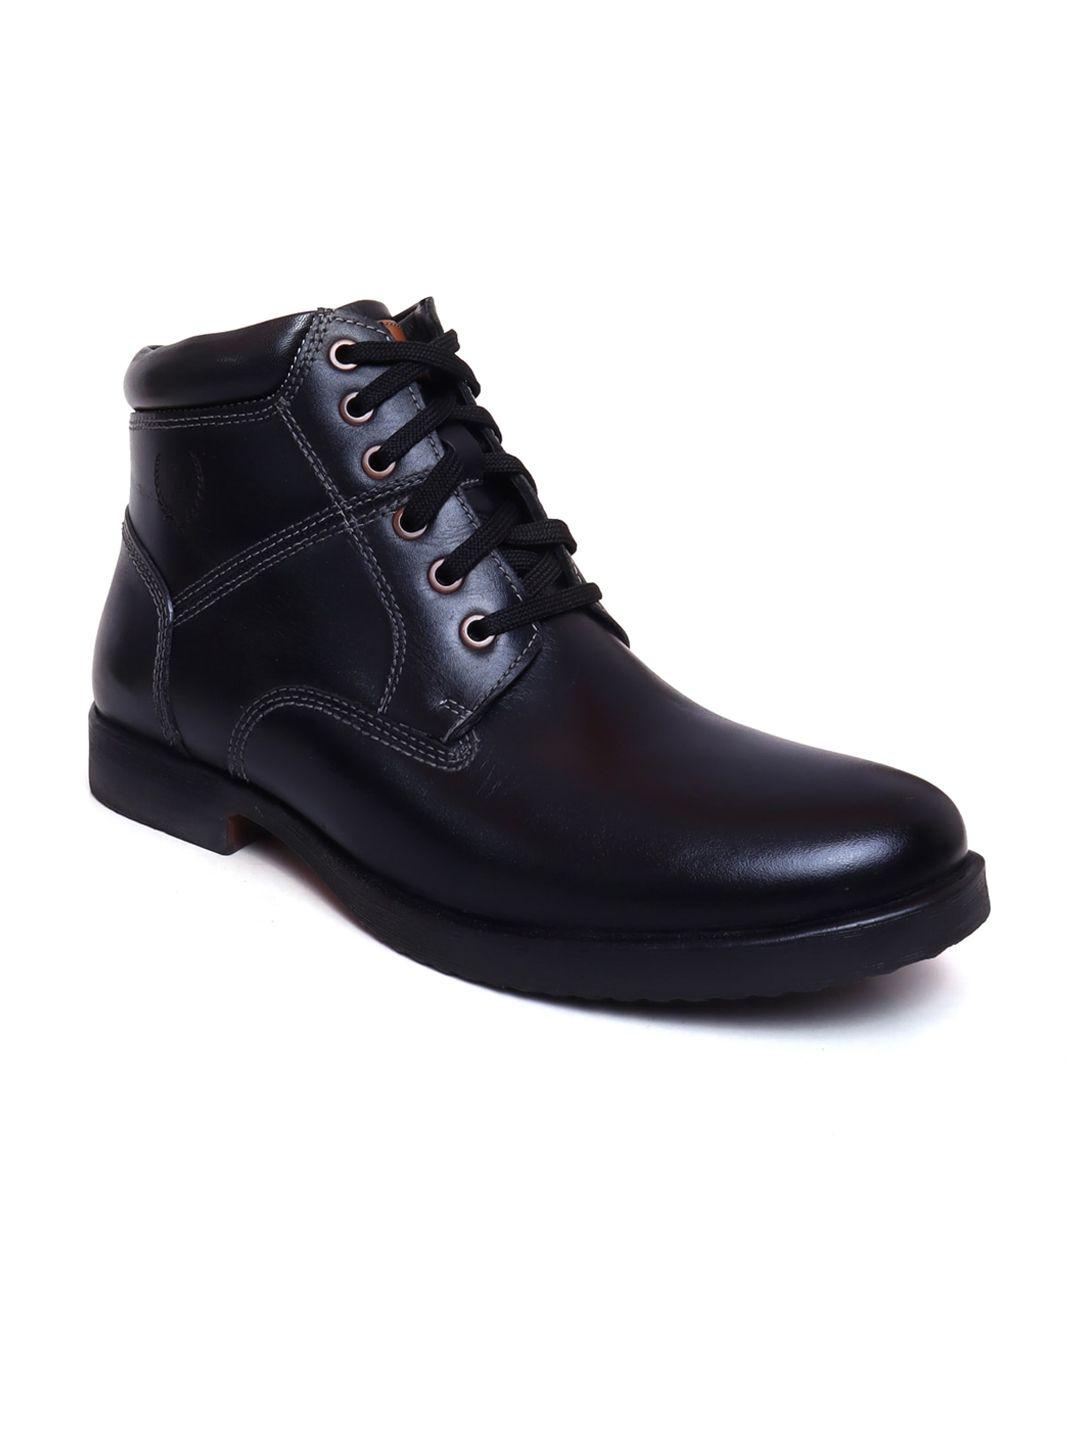 zoom shoes men mid-top leather regular boots